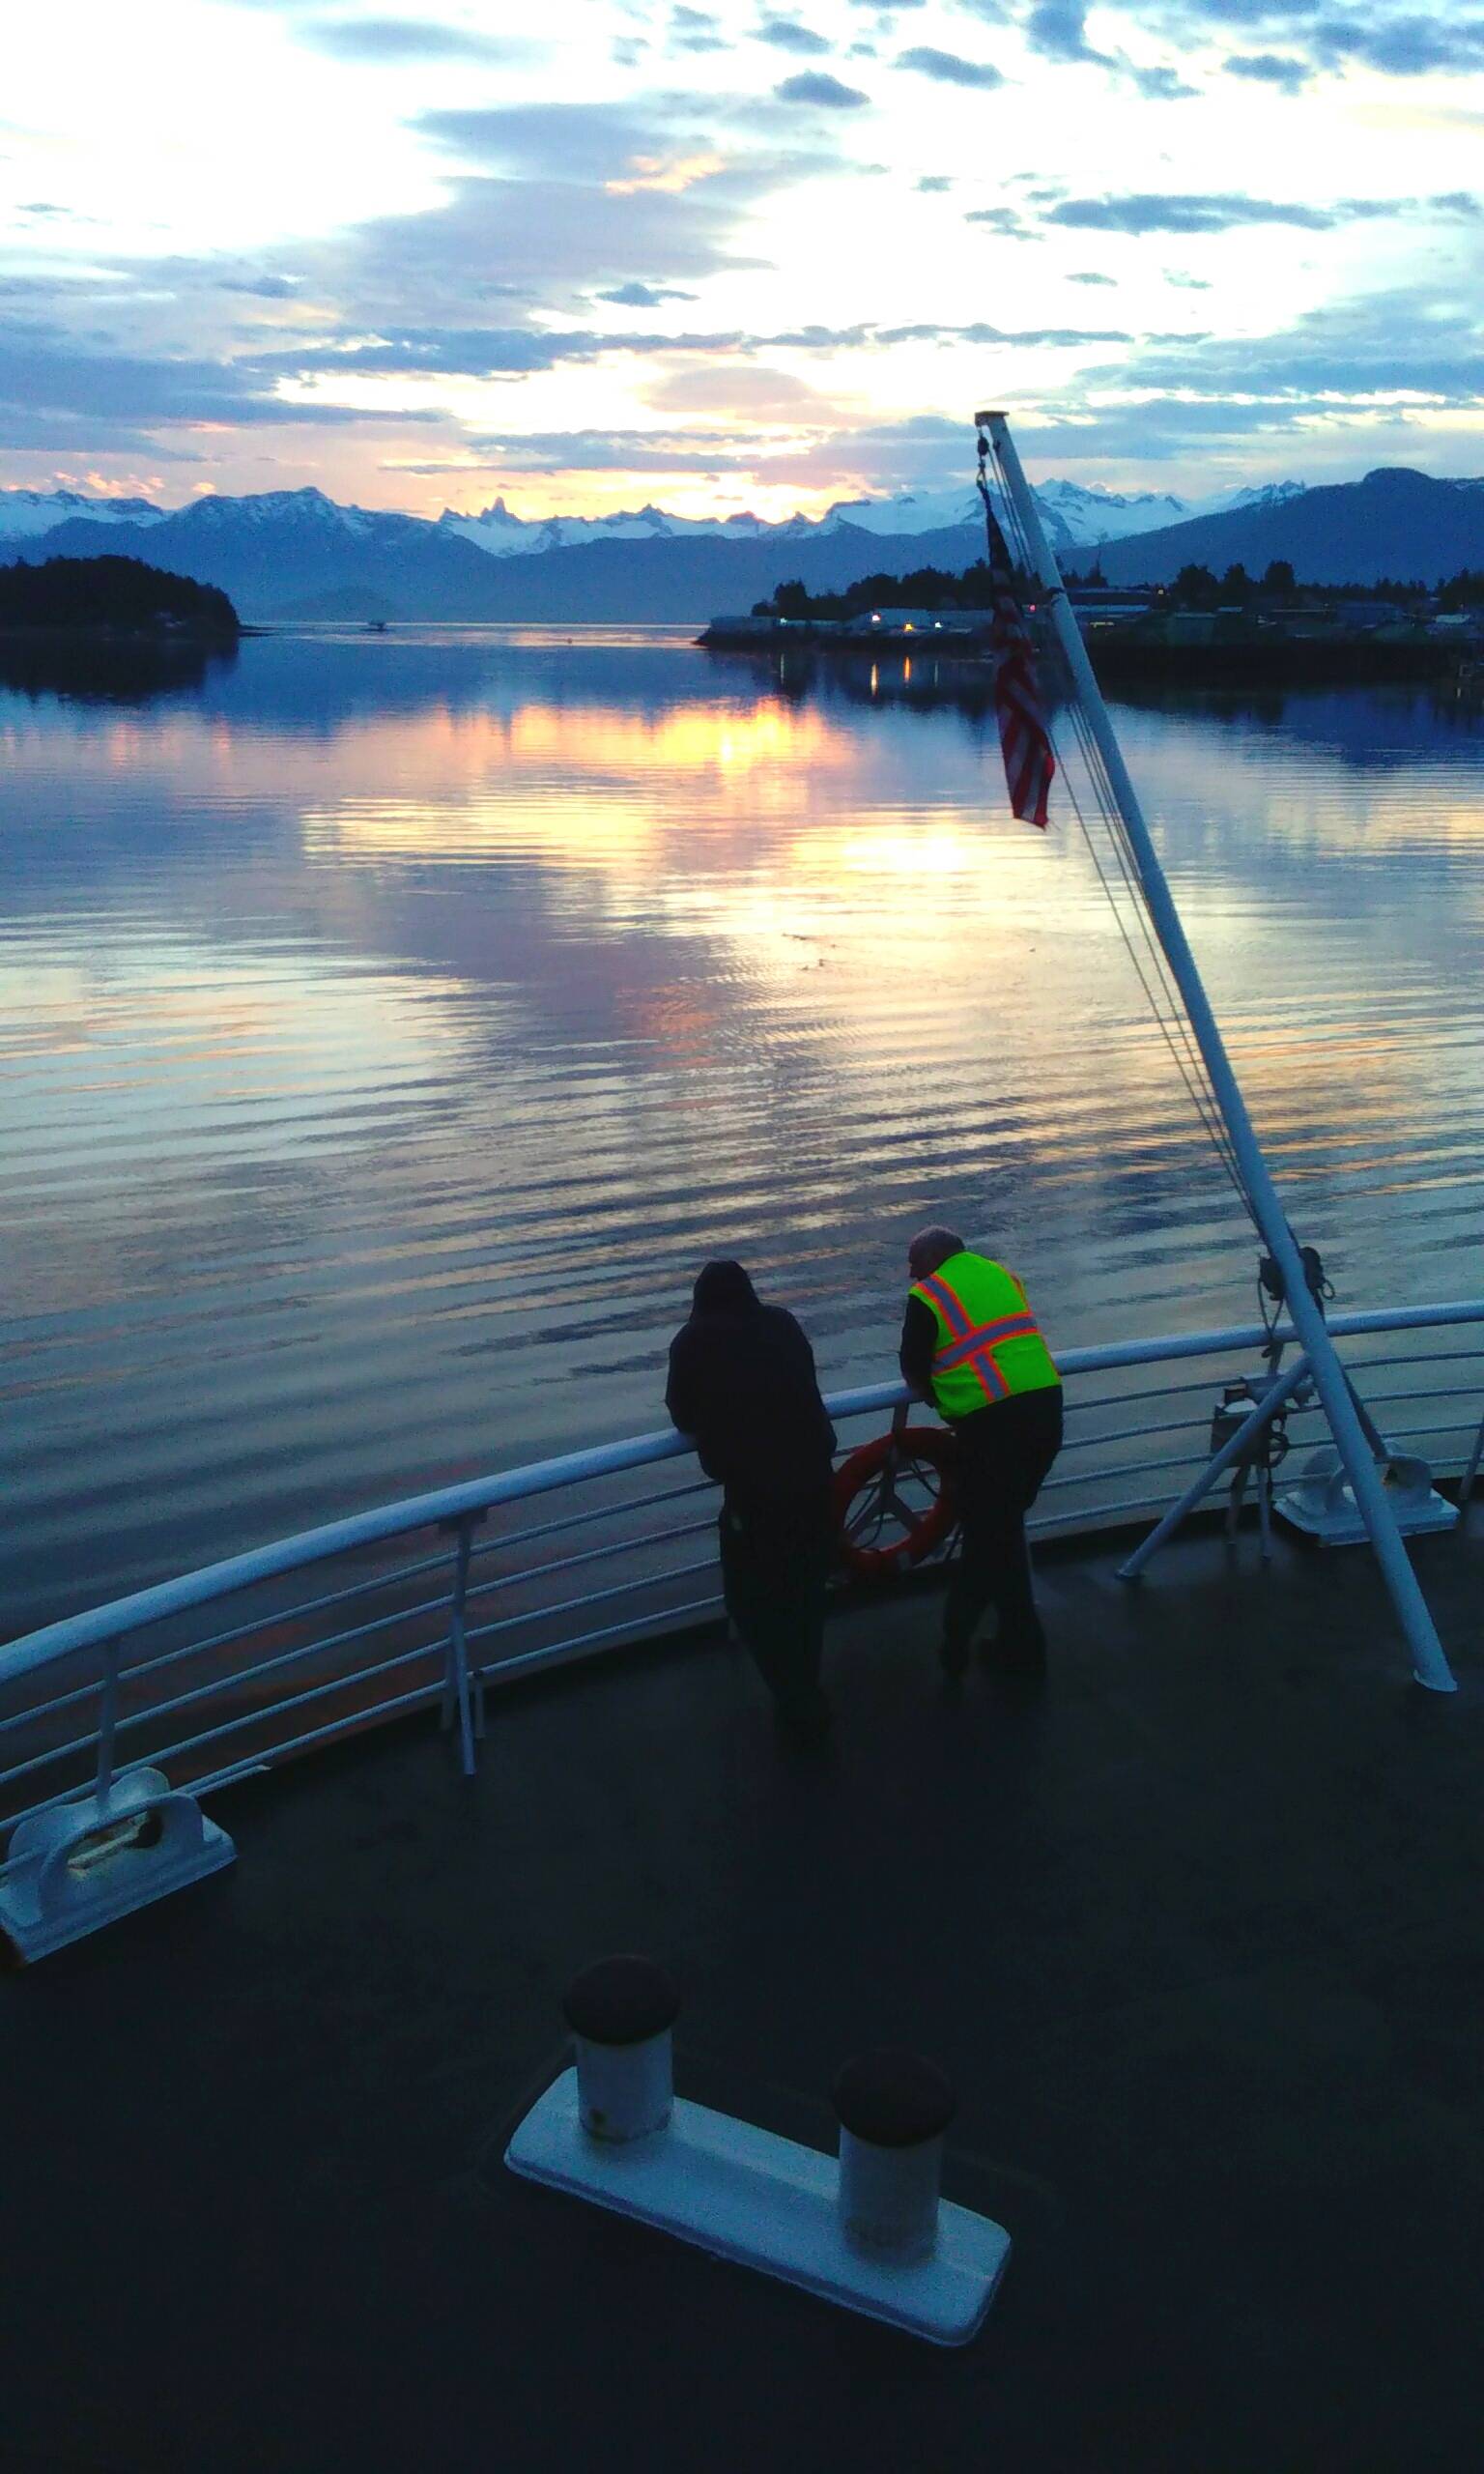 The former crewmember who helped the author chatting with a ferry hand. Tara Neilson | For the Capital City Weekly